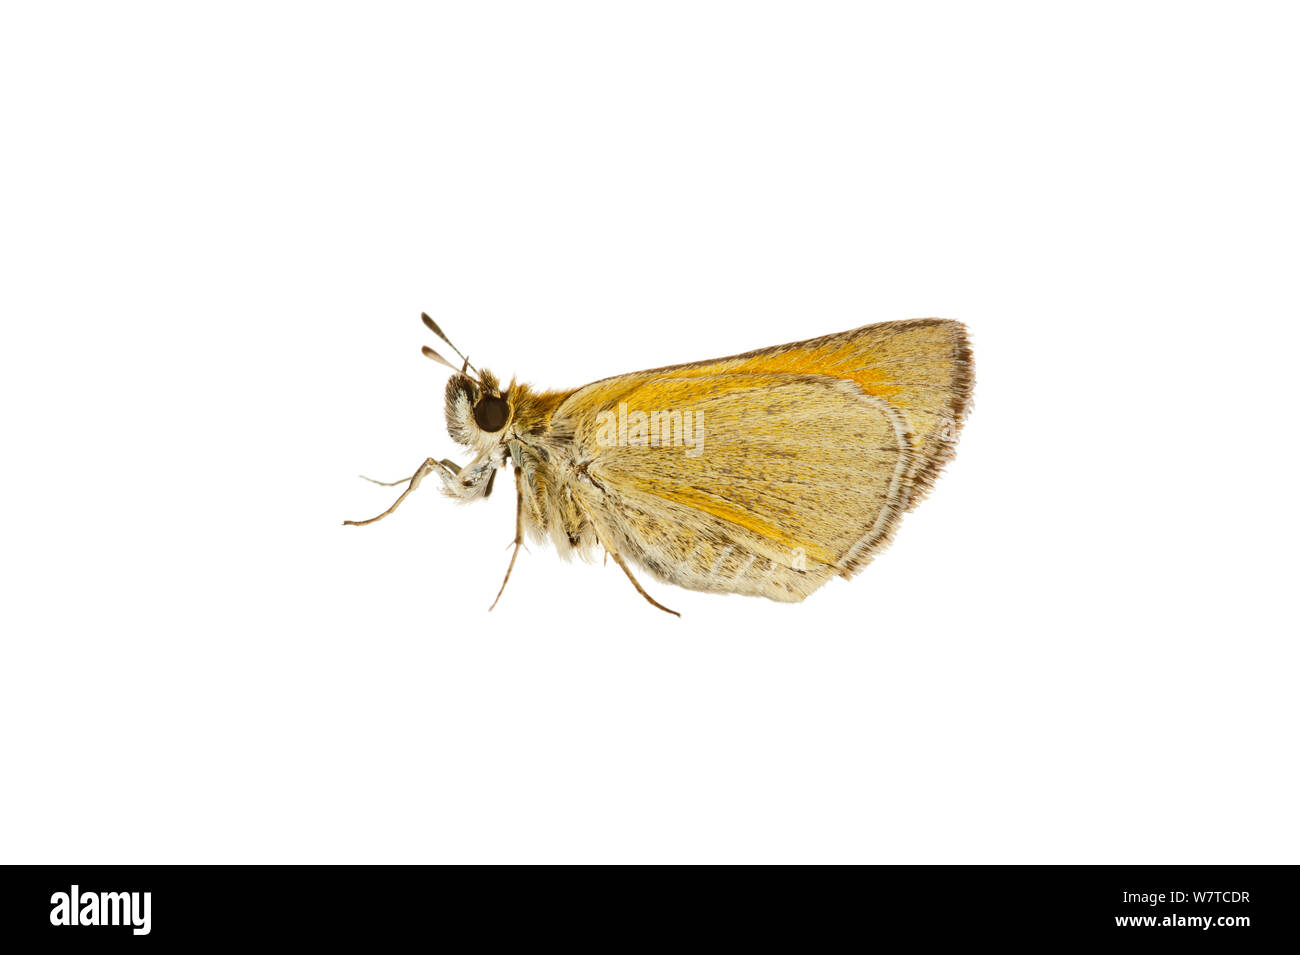 Small skipper butterfly (Thymelicus sylvestris) Hirschthal Rhineland-Palatinate, Germany, June. Meetyourneighbours.net project Stock Photo